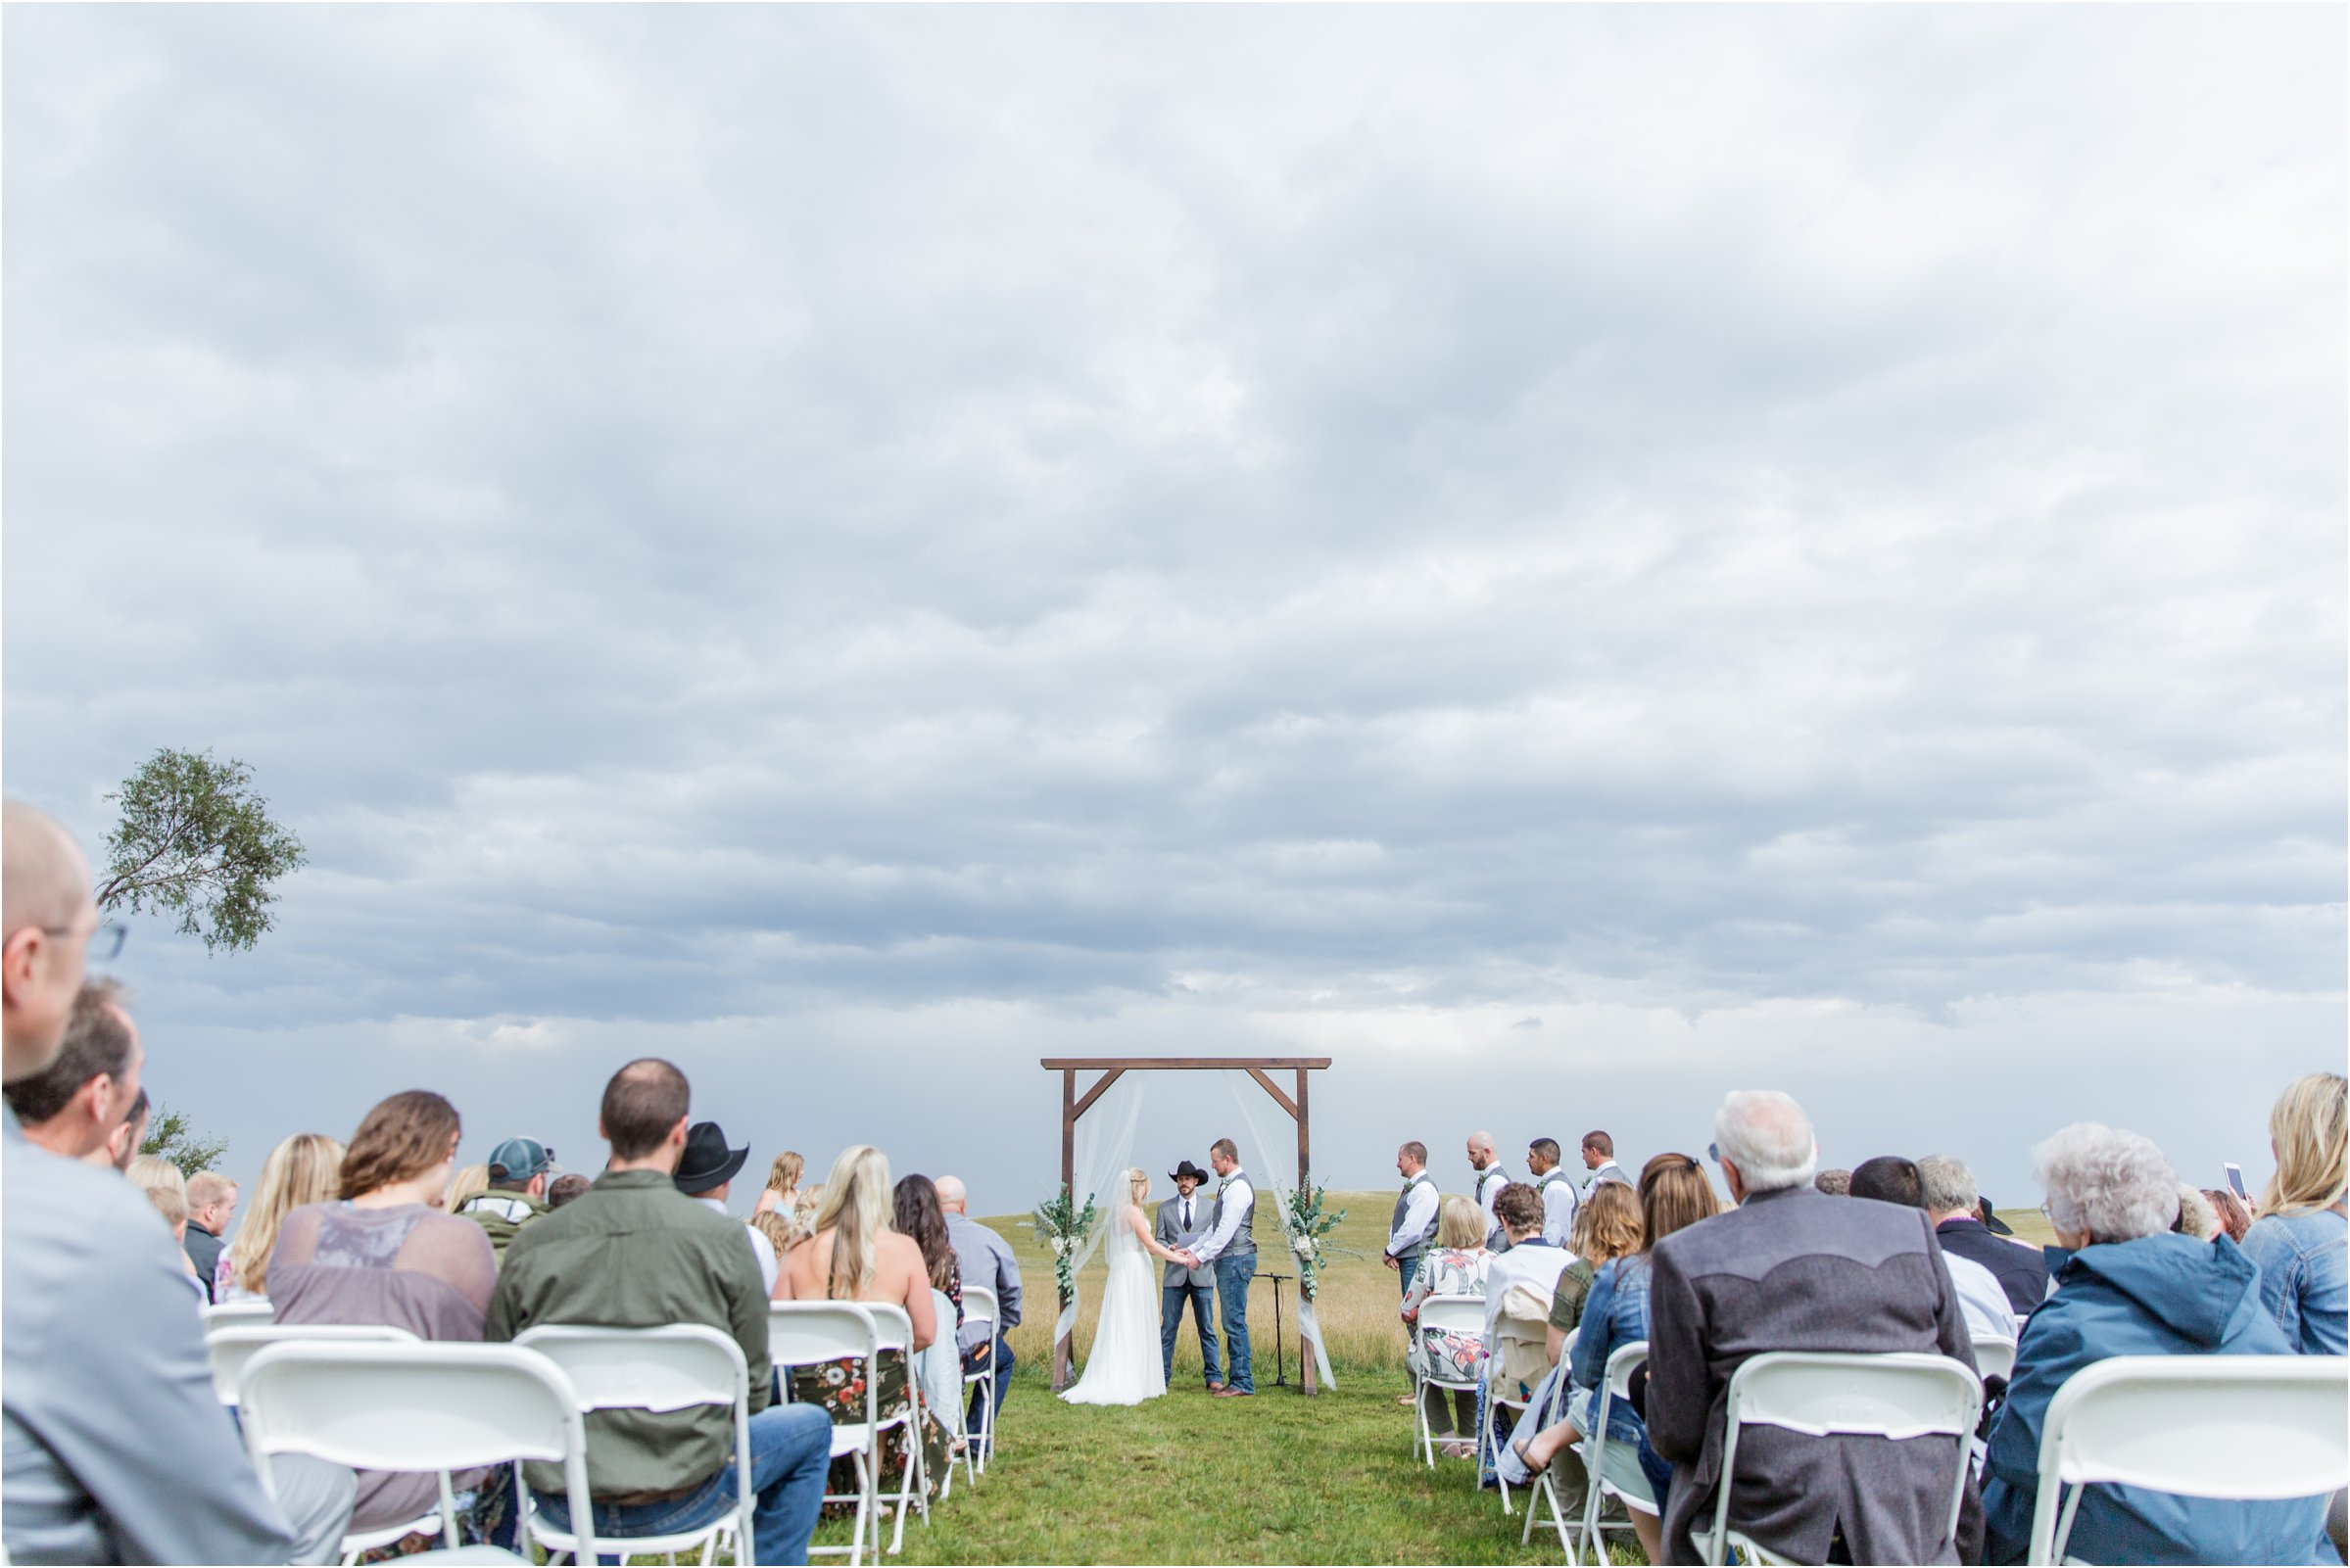 the bride and groom hold hands in front of their guests for the ceremony on the wyoming prairie